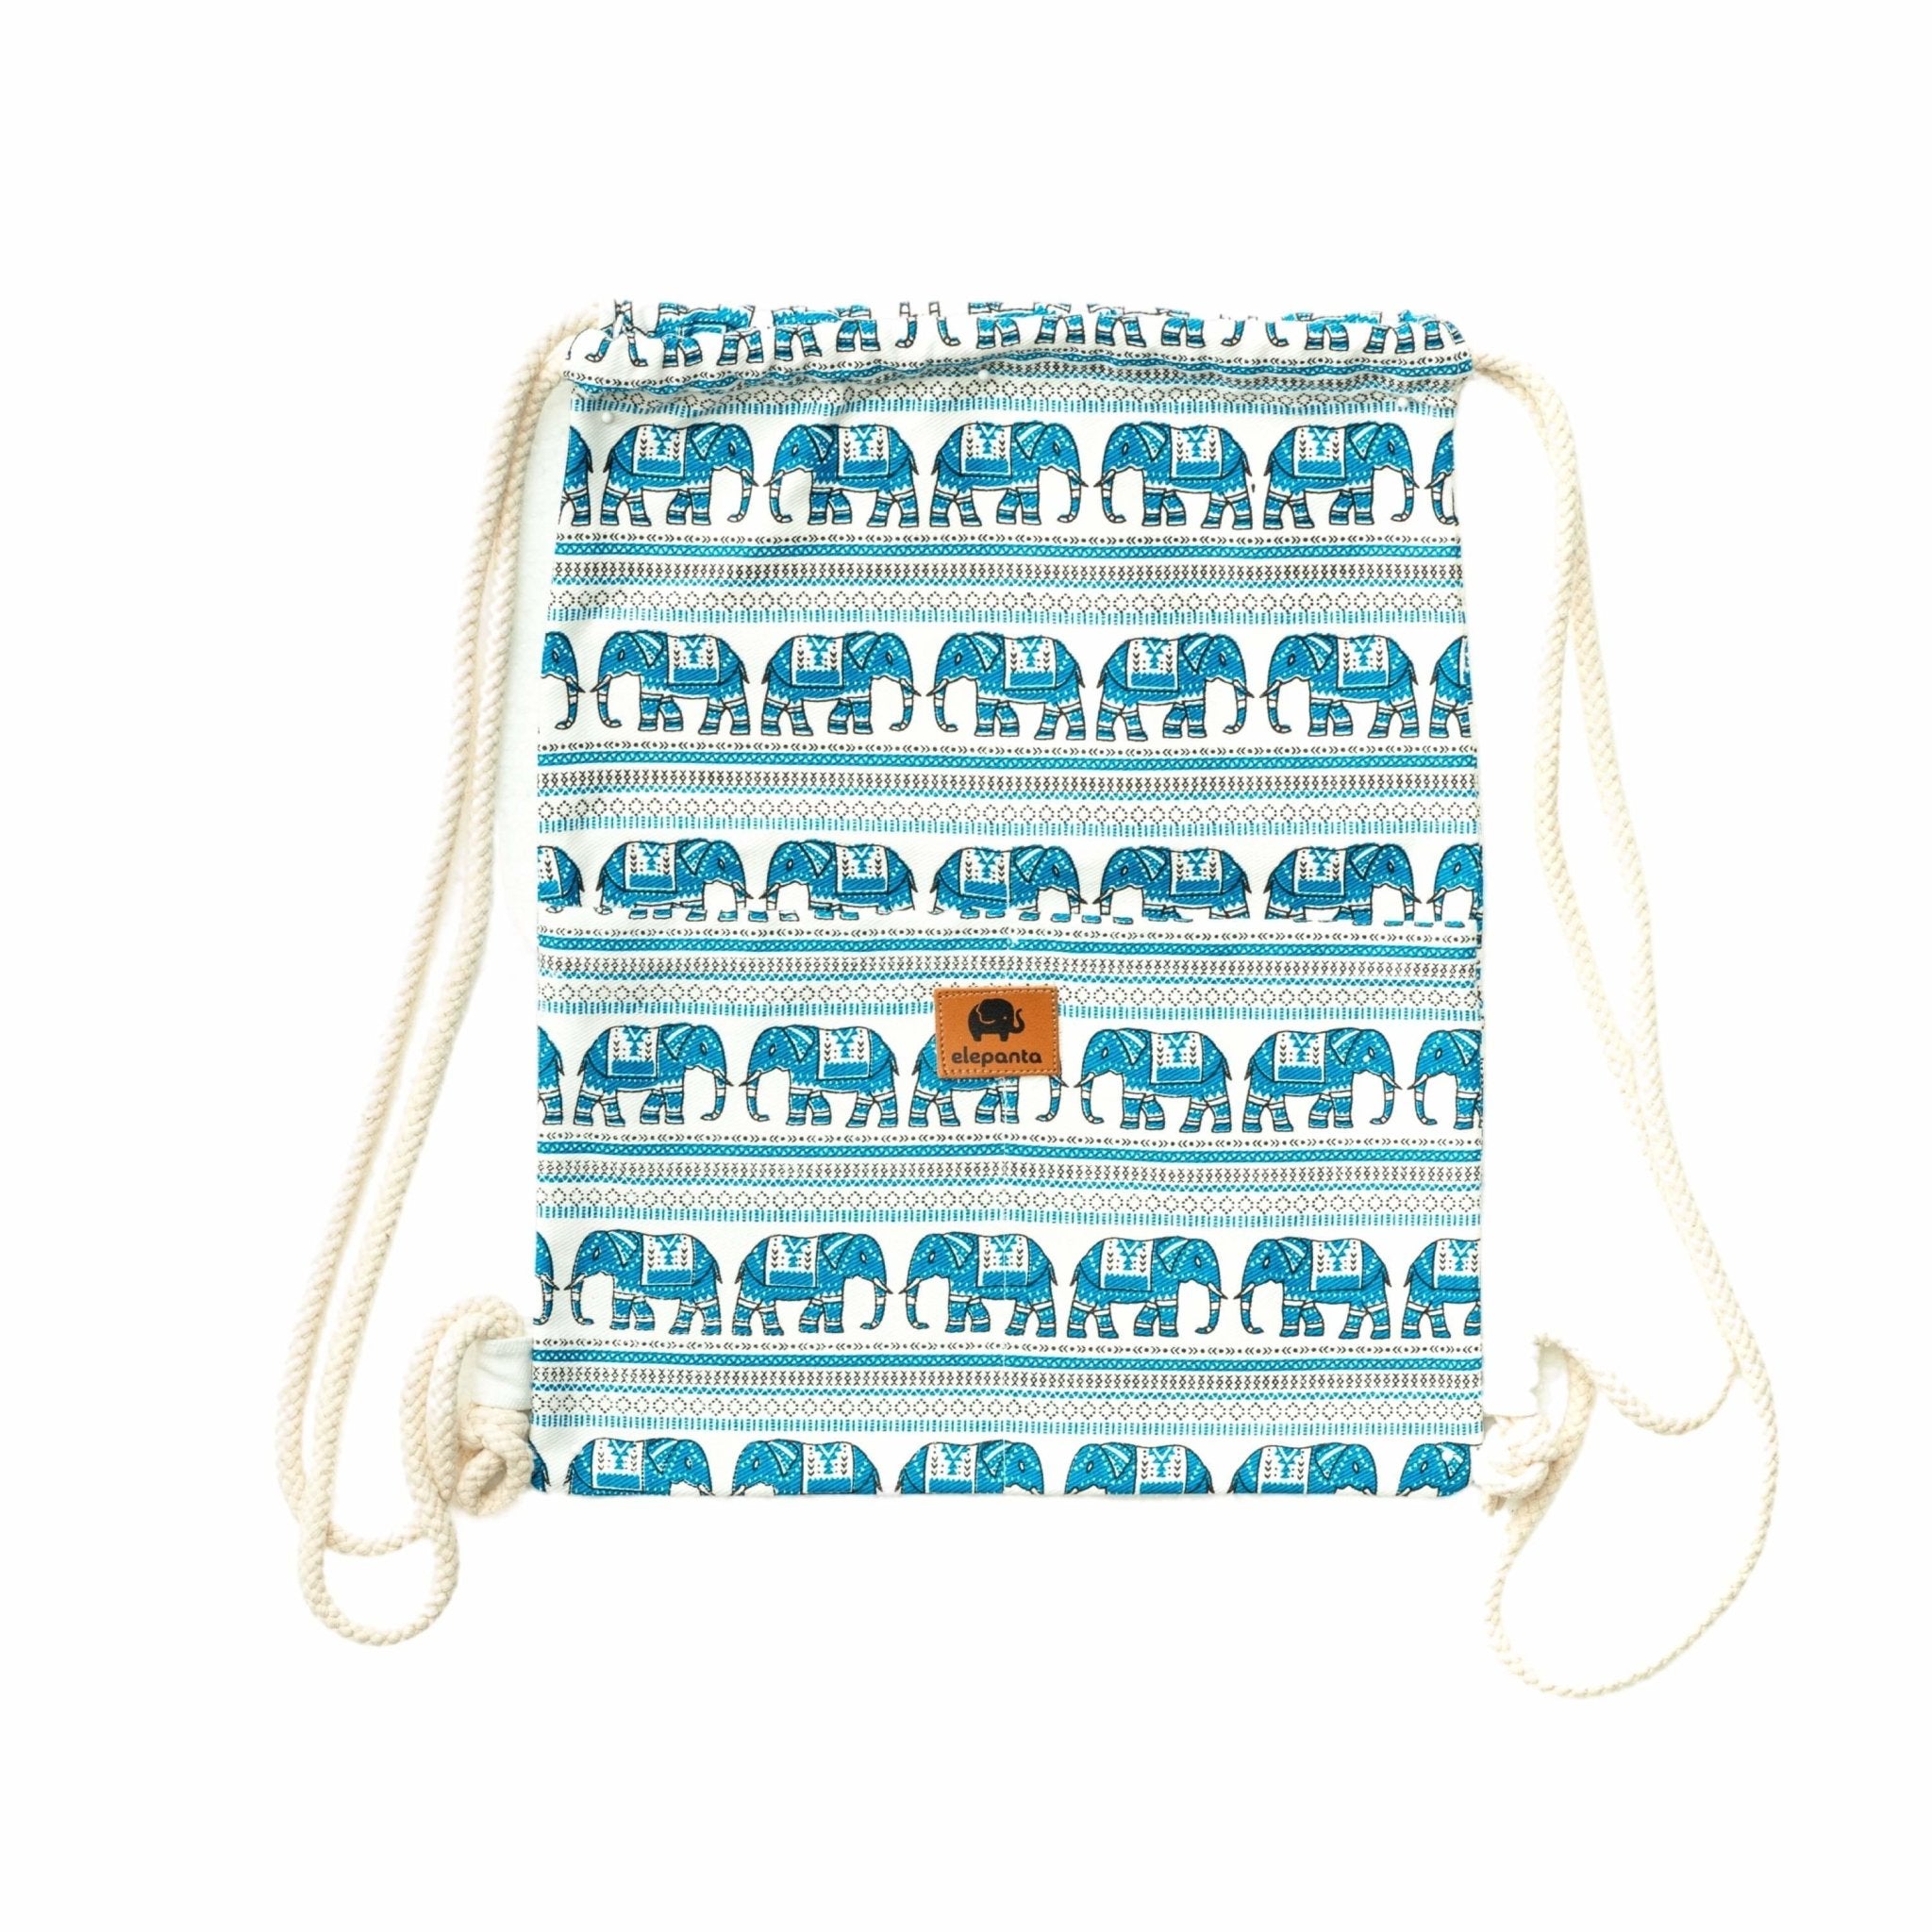 AGRA DRAWSTRING BACKPACK Elepanta Backpacks - Buy Today Elephant Pants Jewelry And Bohemian Clothes Handmade In Thailand Help To Save The Elephants FairTrade And Vegan